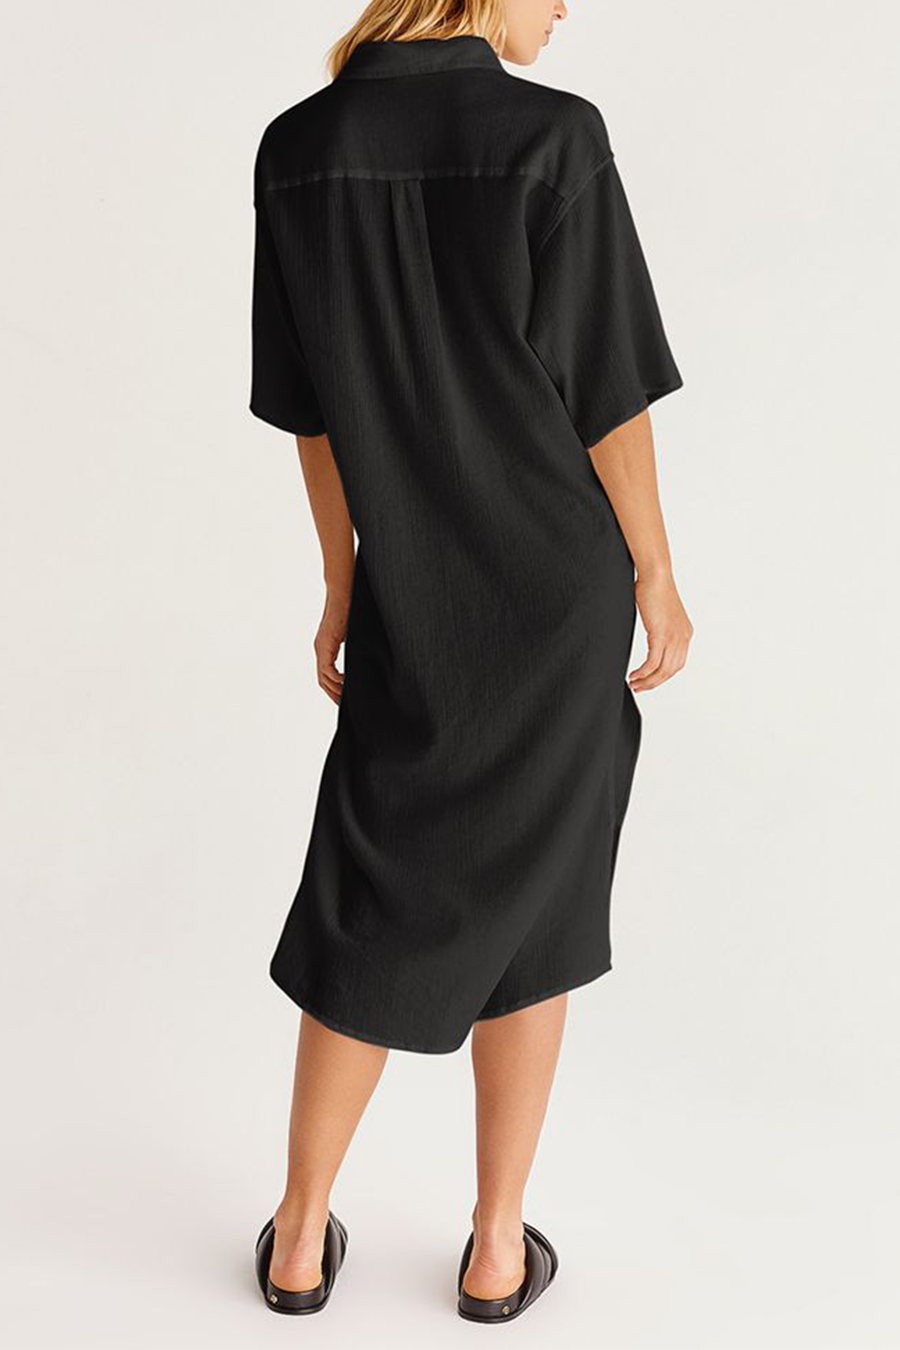 Lina Button Up Duster | Black - Main Image Number 2 of 2